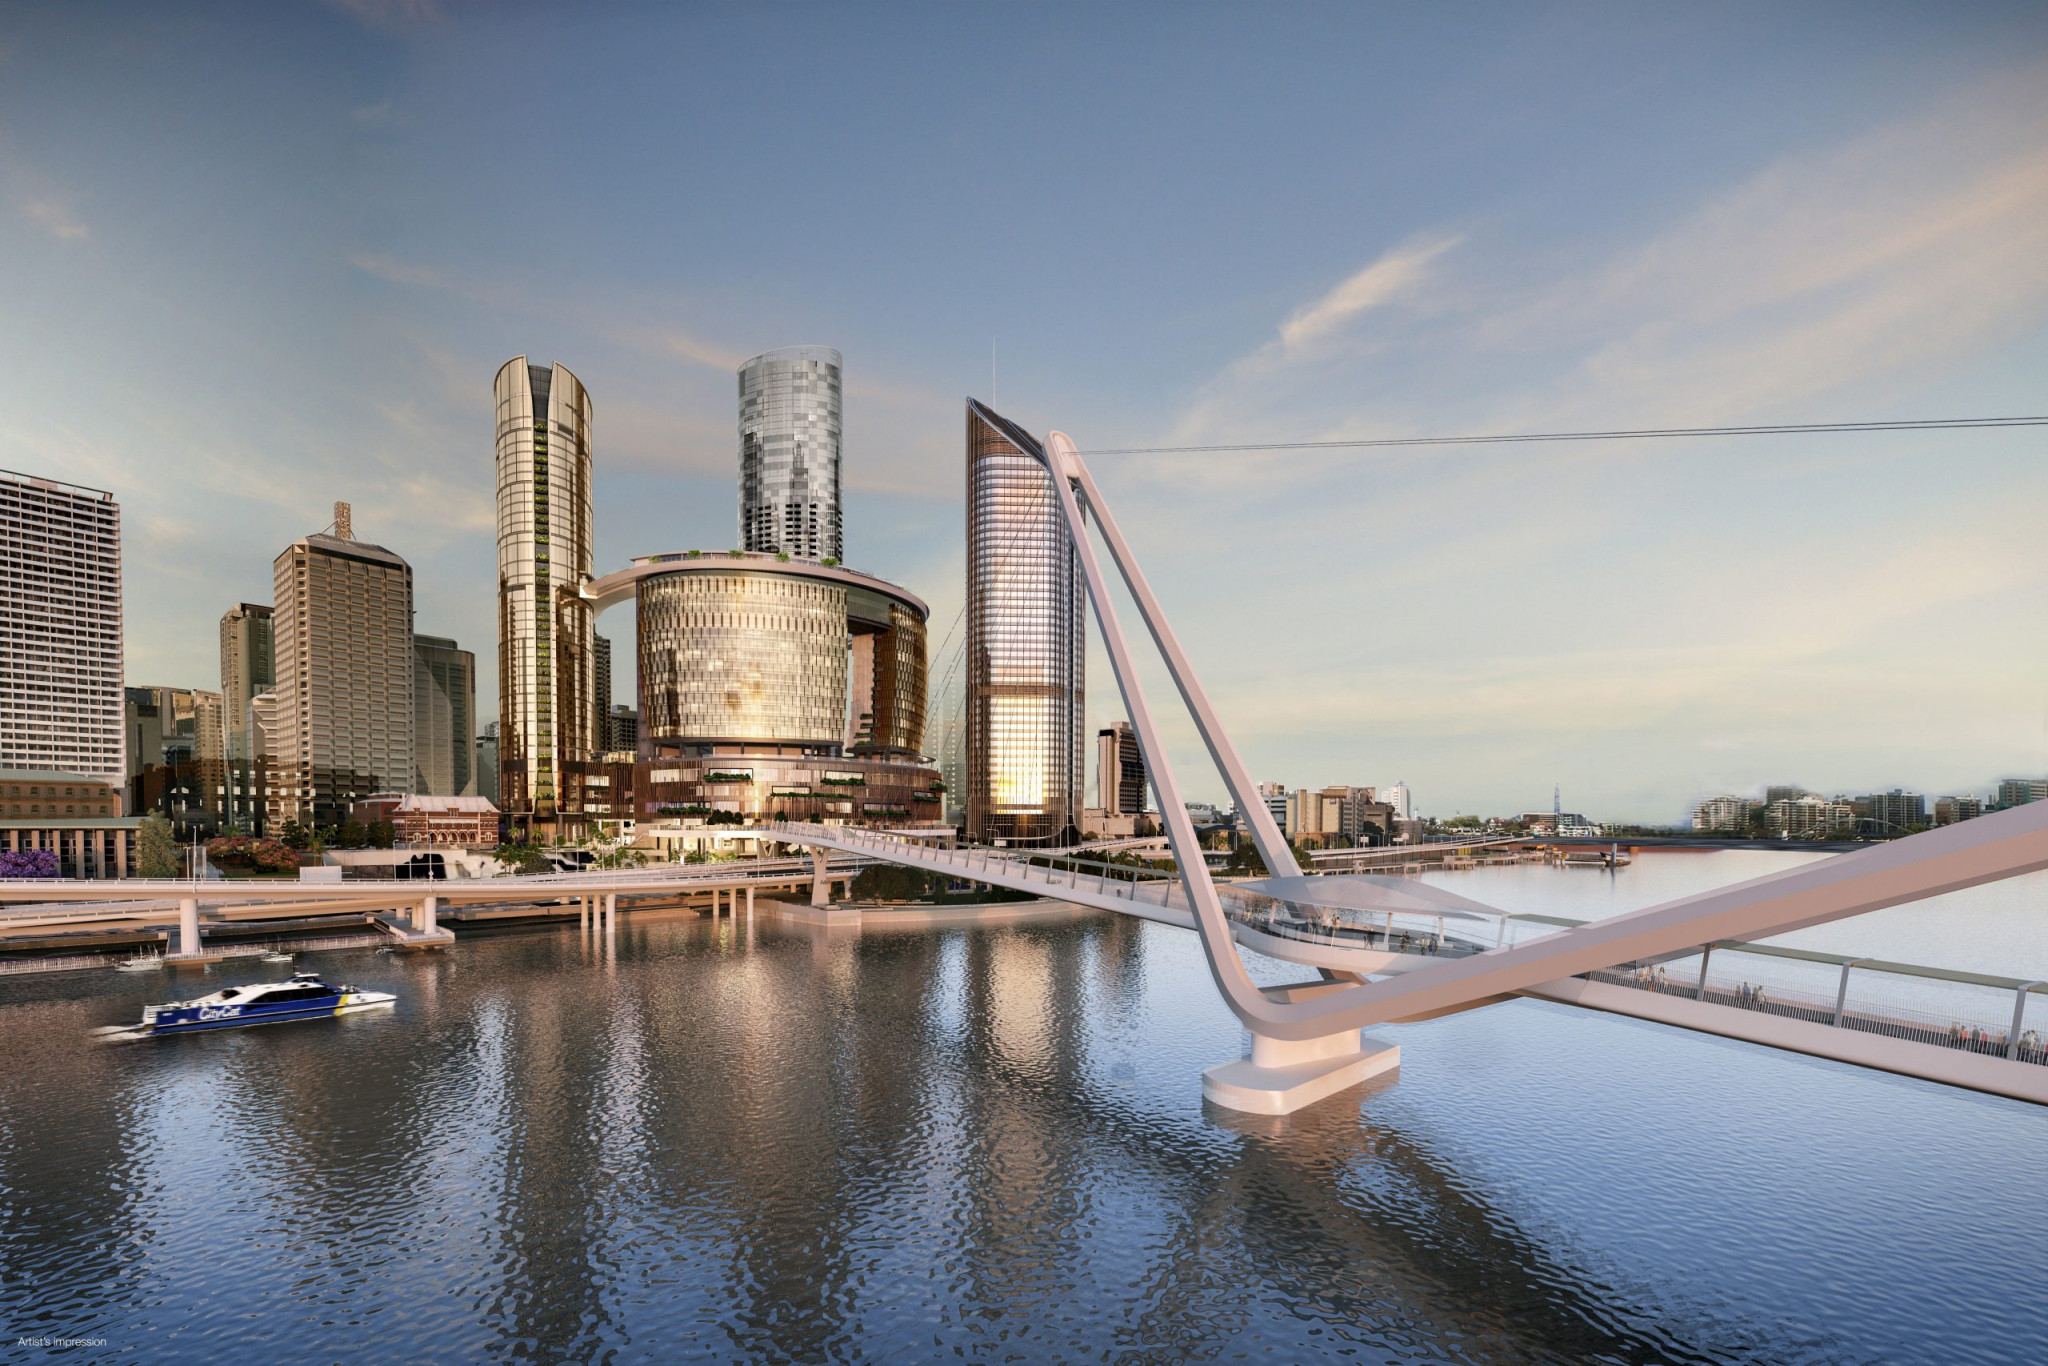  The opening of Queen's Wharf in Brisbane, set to be home to several five-star hotels for the 2032 Olympics when completed, has been postponed by four months ©Queen's Wharf